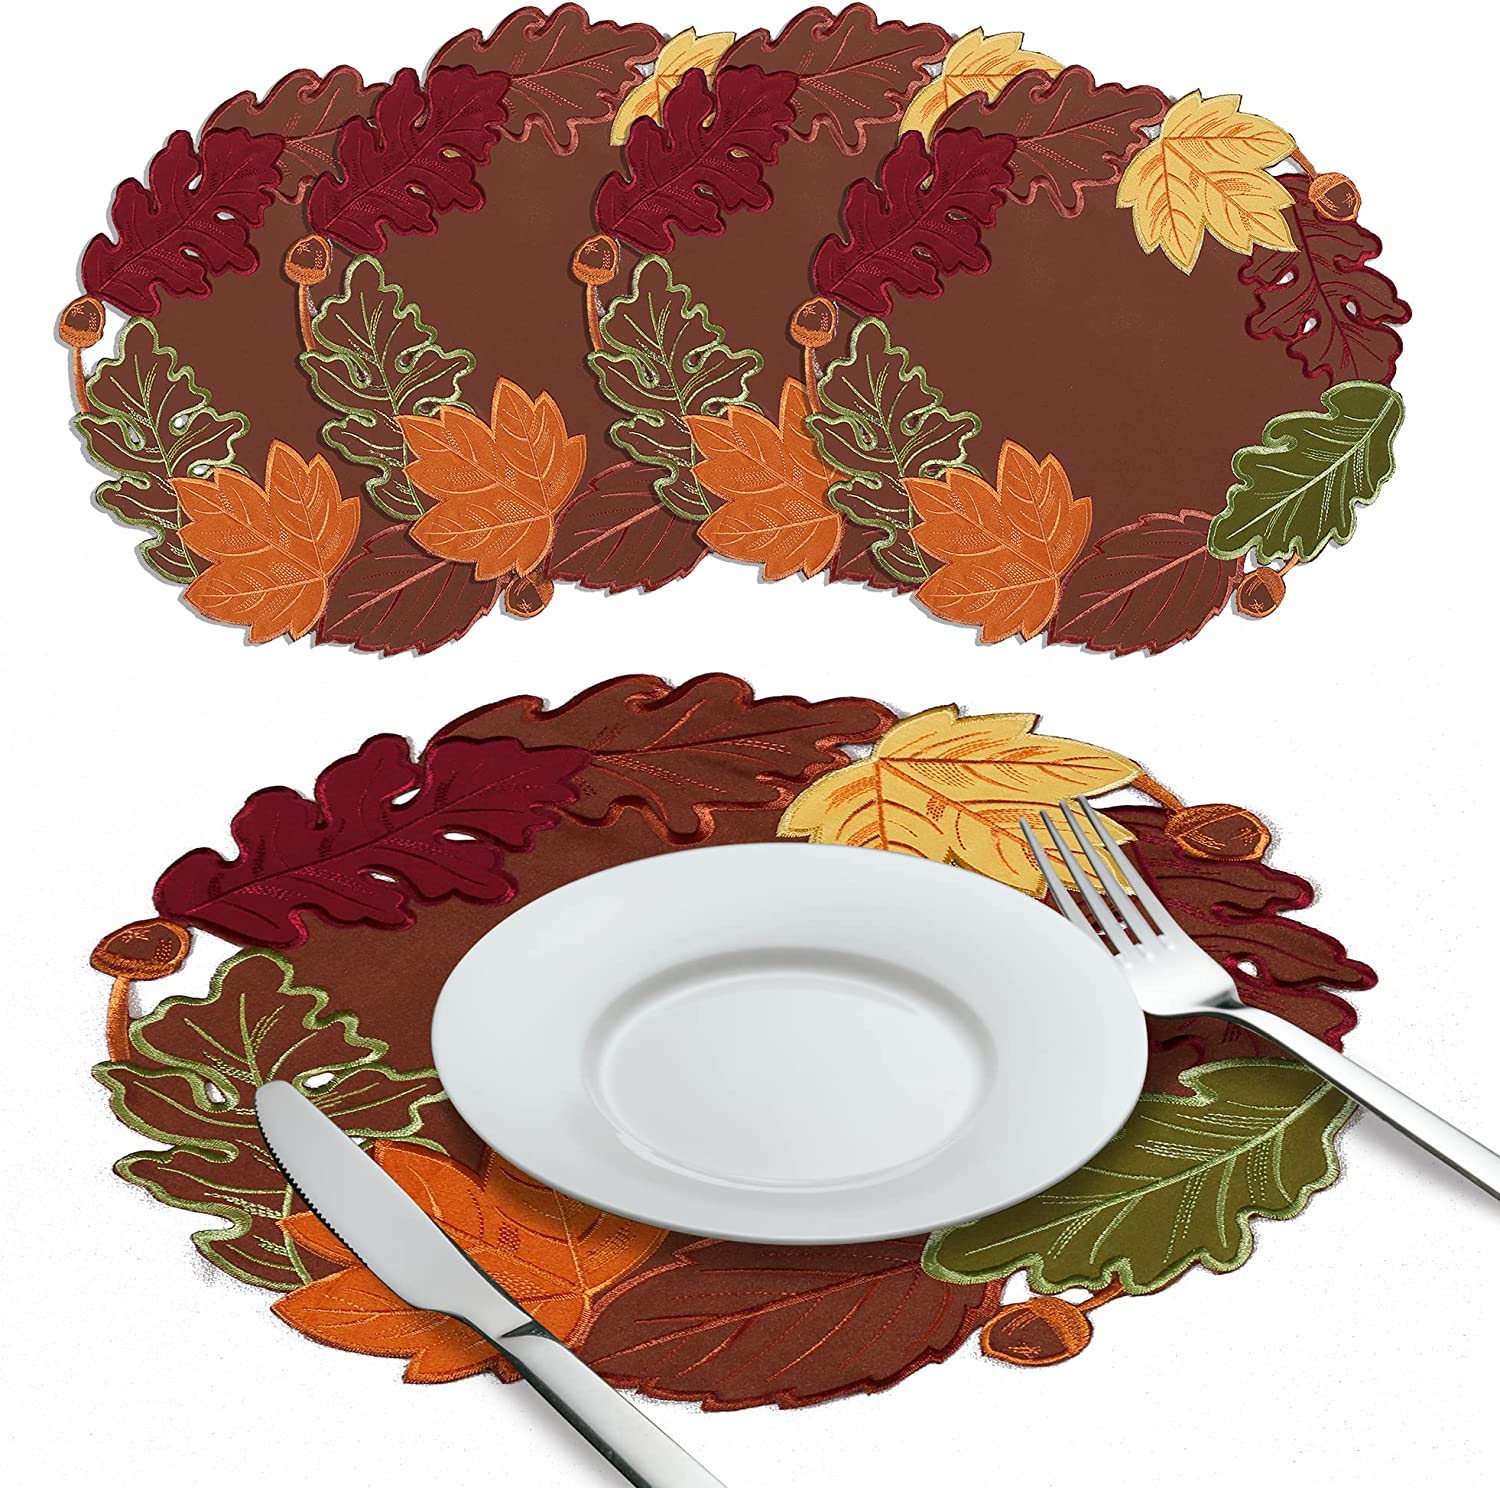 Set of 4 15" Table Placemats Fall Leaf Thanksgiving Doilies with Cutwork Applique Embroidery on Border